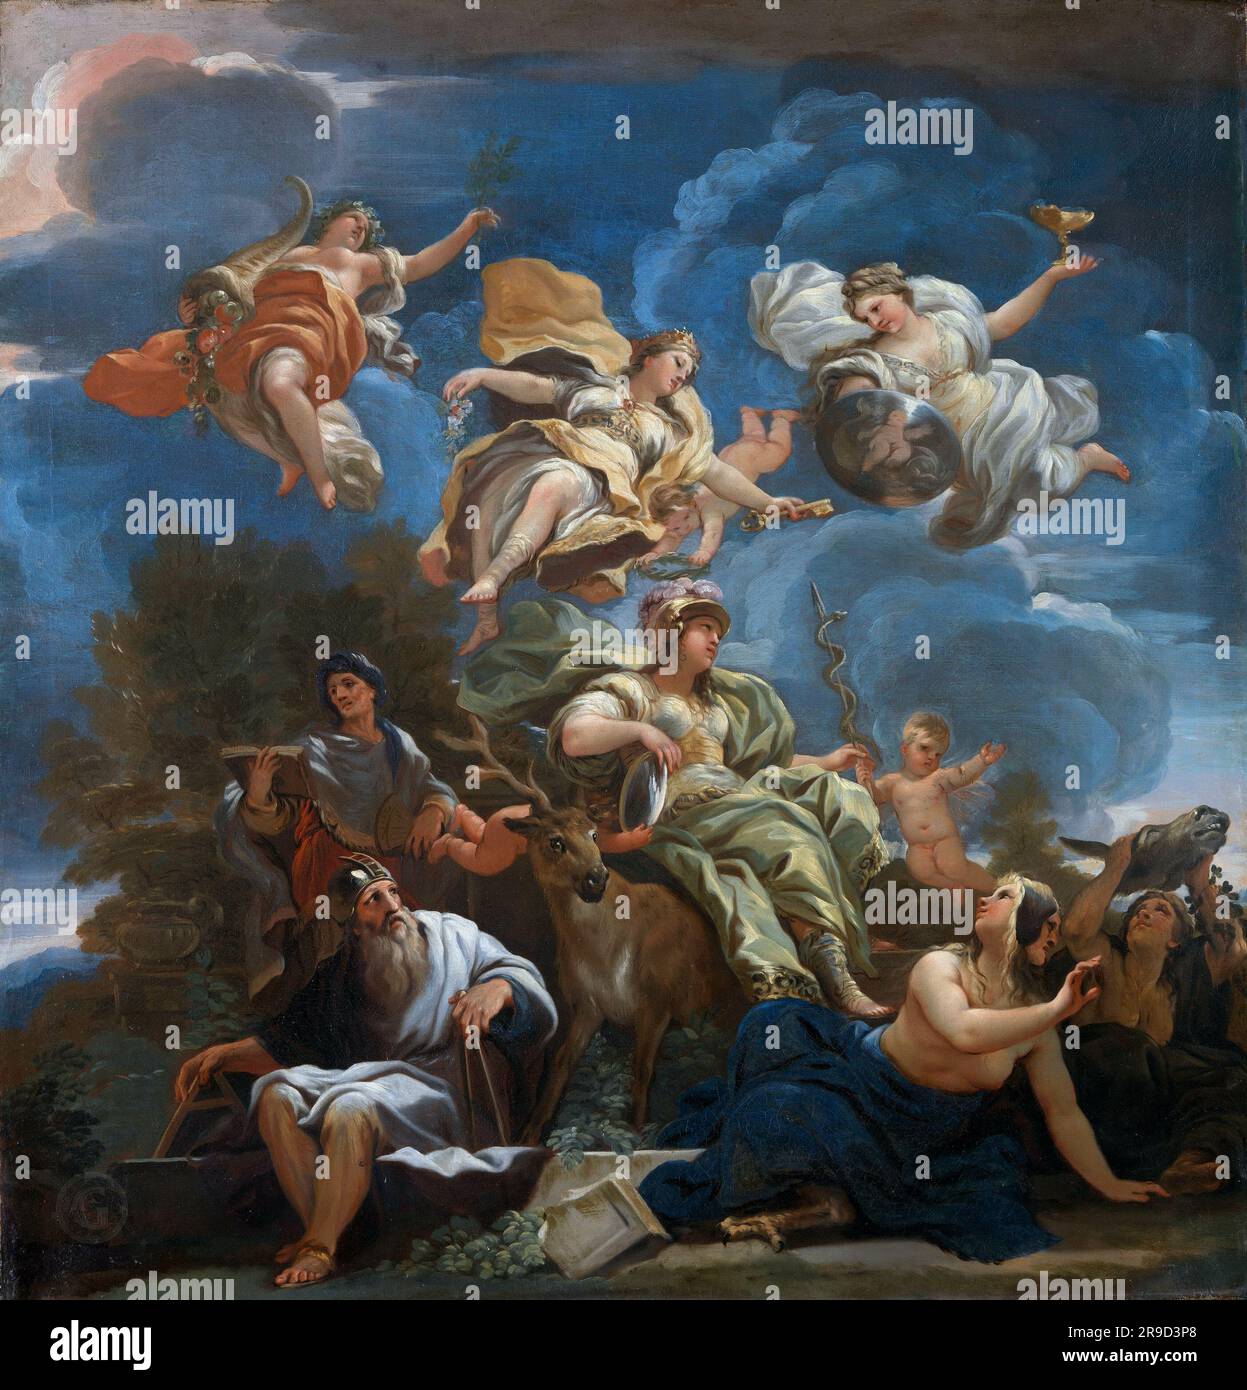 National Gallery UK – Luca Giordano - Allegory of Prudence Stock Photo